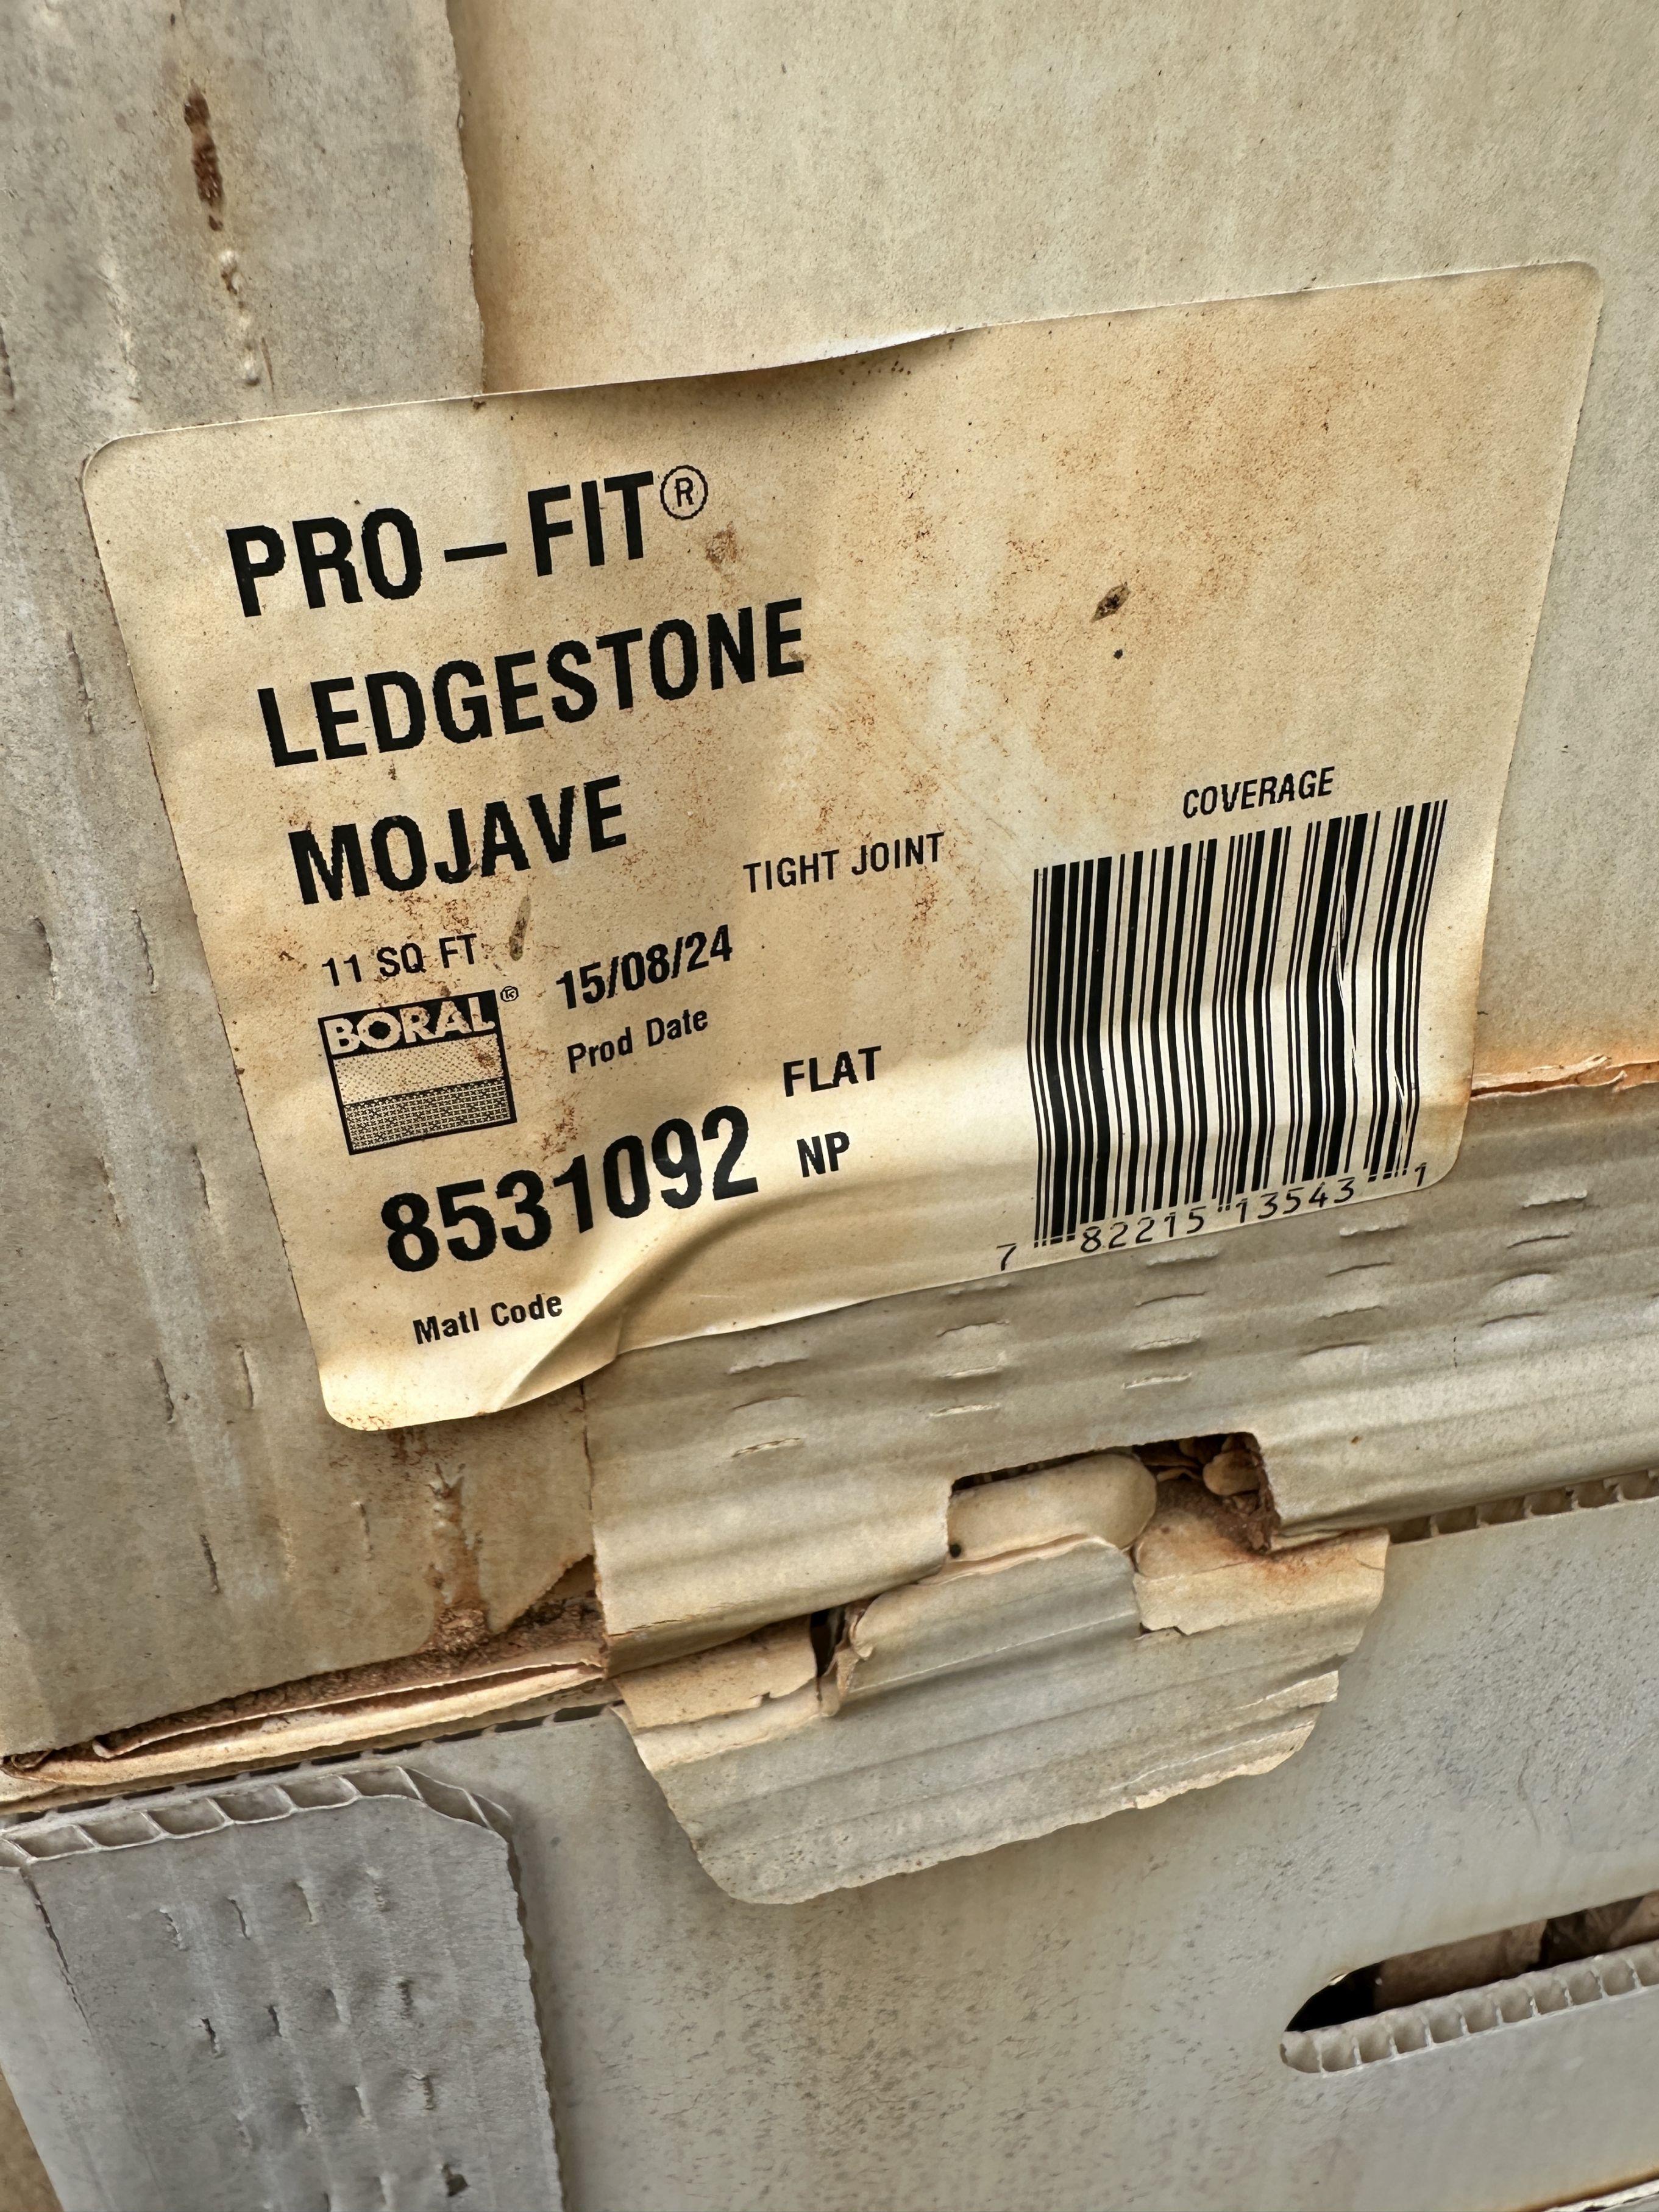 4 Boxes Full of Stone/Pro Fit Ledgestone Mojave (Local Pick Up Only)